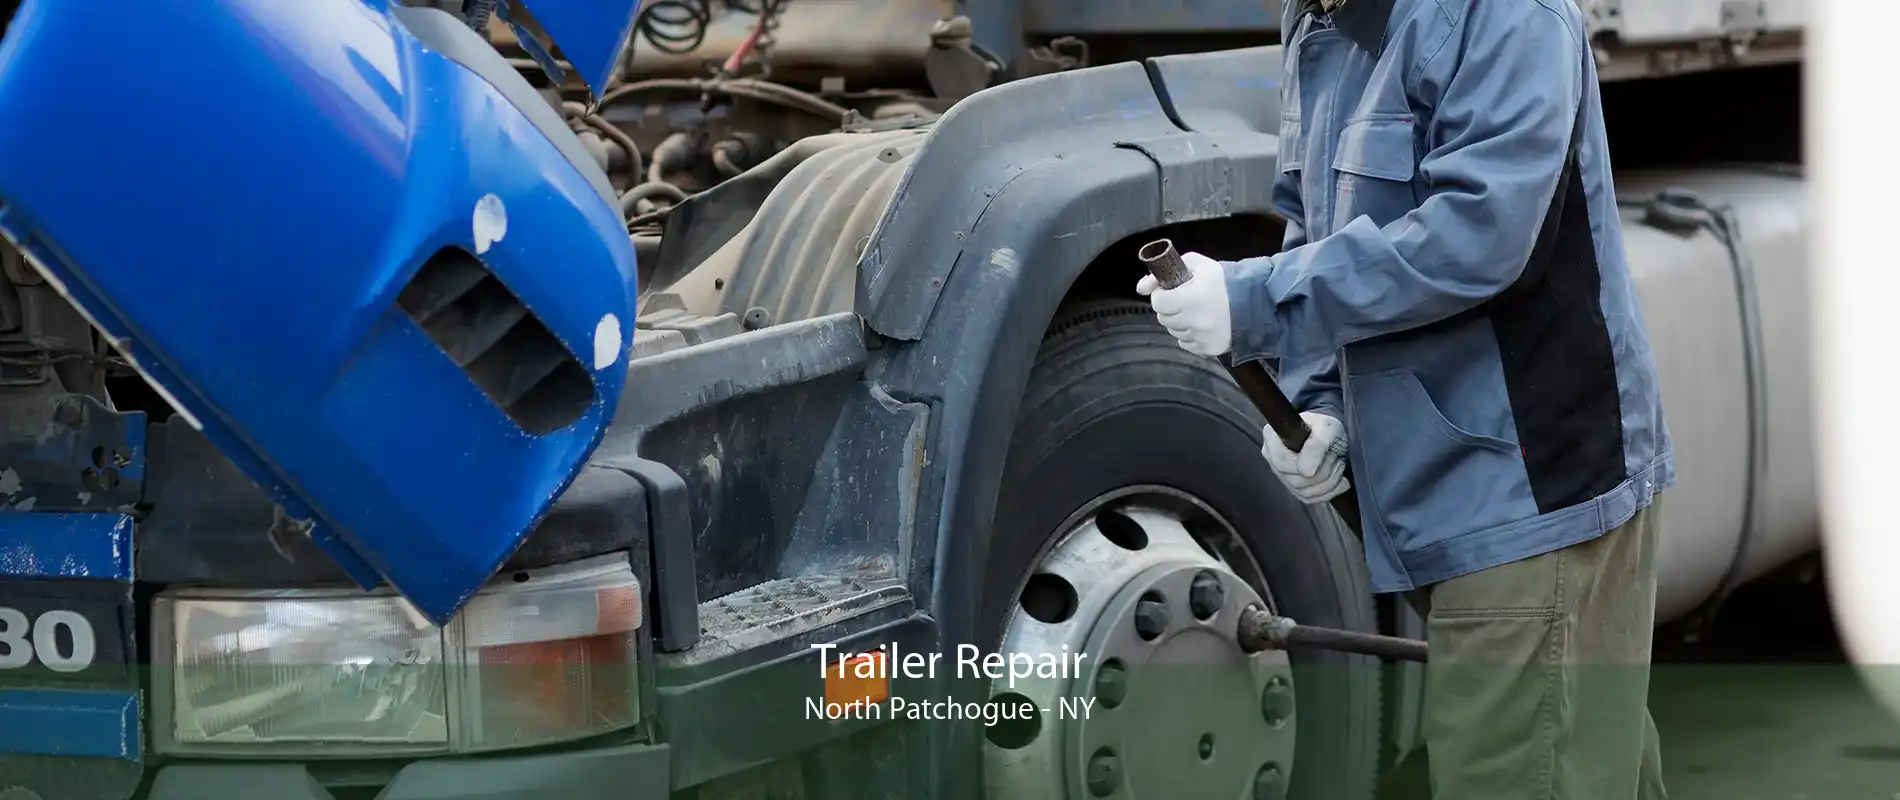 Trailer Repair North Patchogue - NY